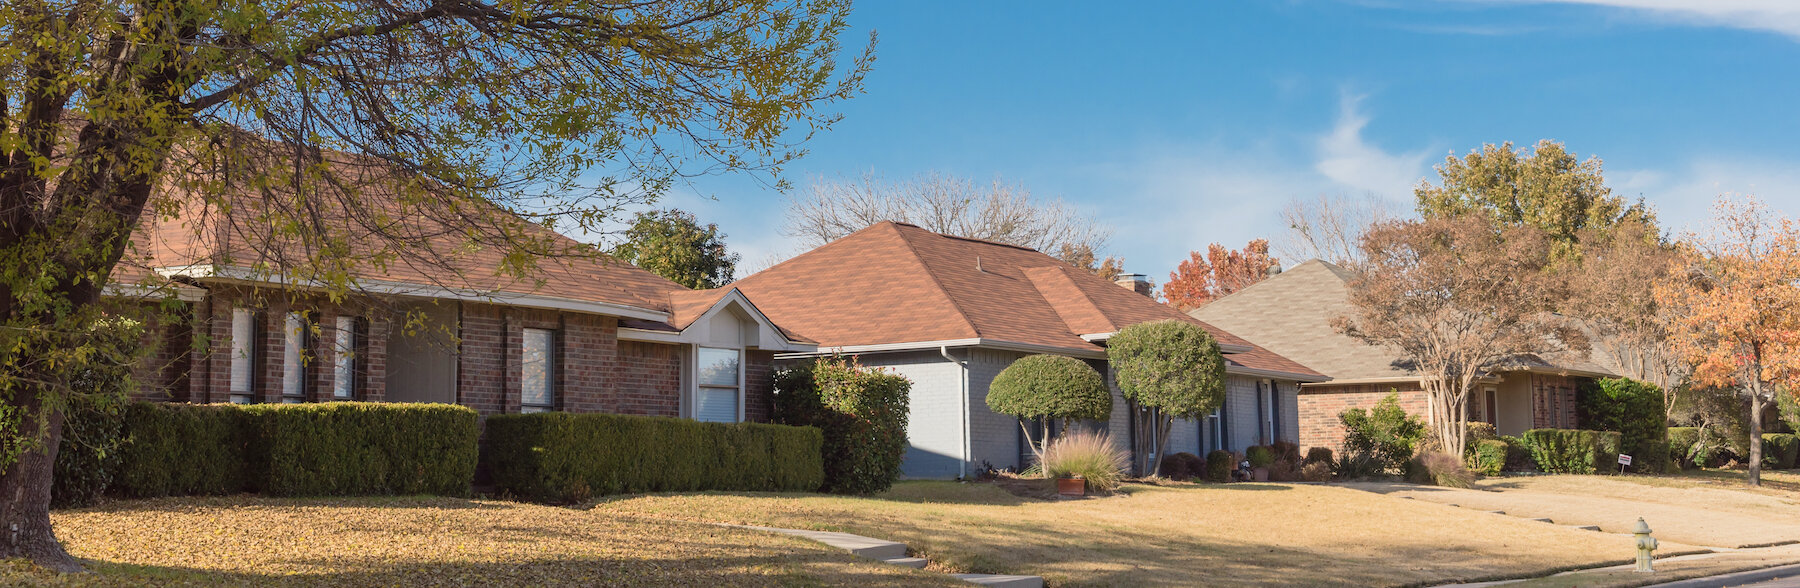 houses bought for cash in Wichita Falls Texas